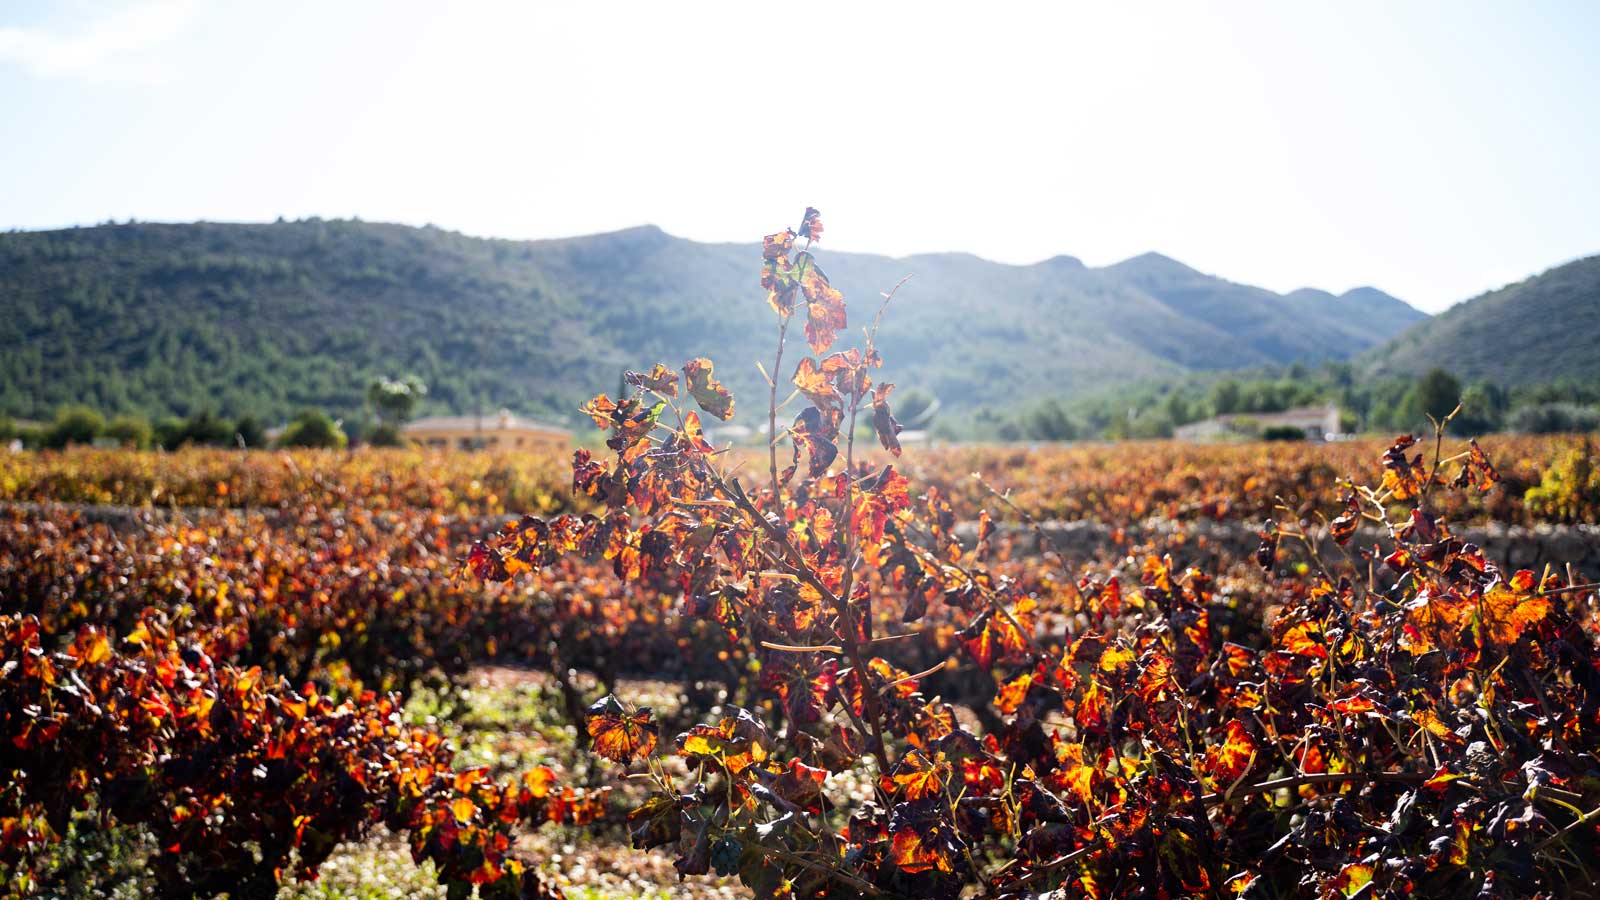 A vineyard in the autumn in the Spanish wine region of Alicante